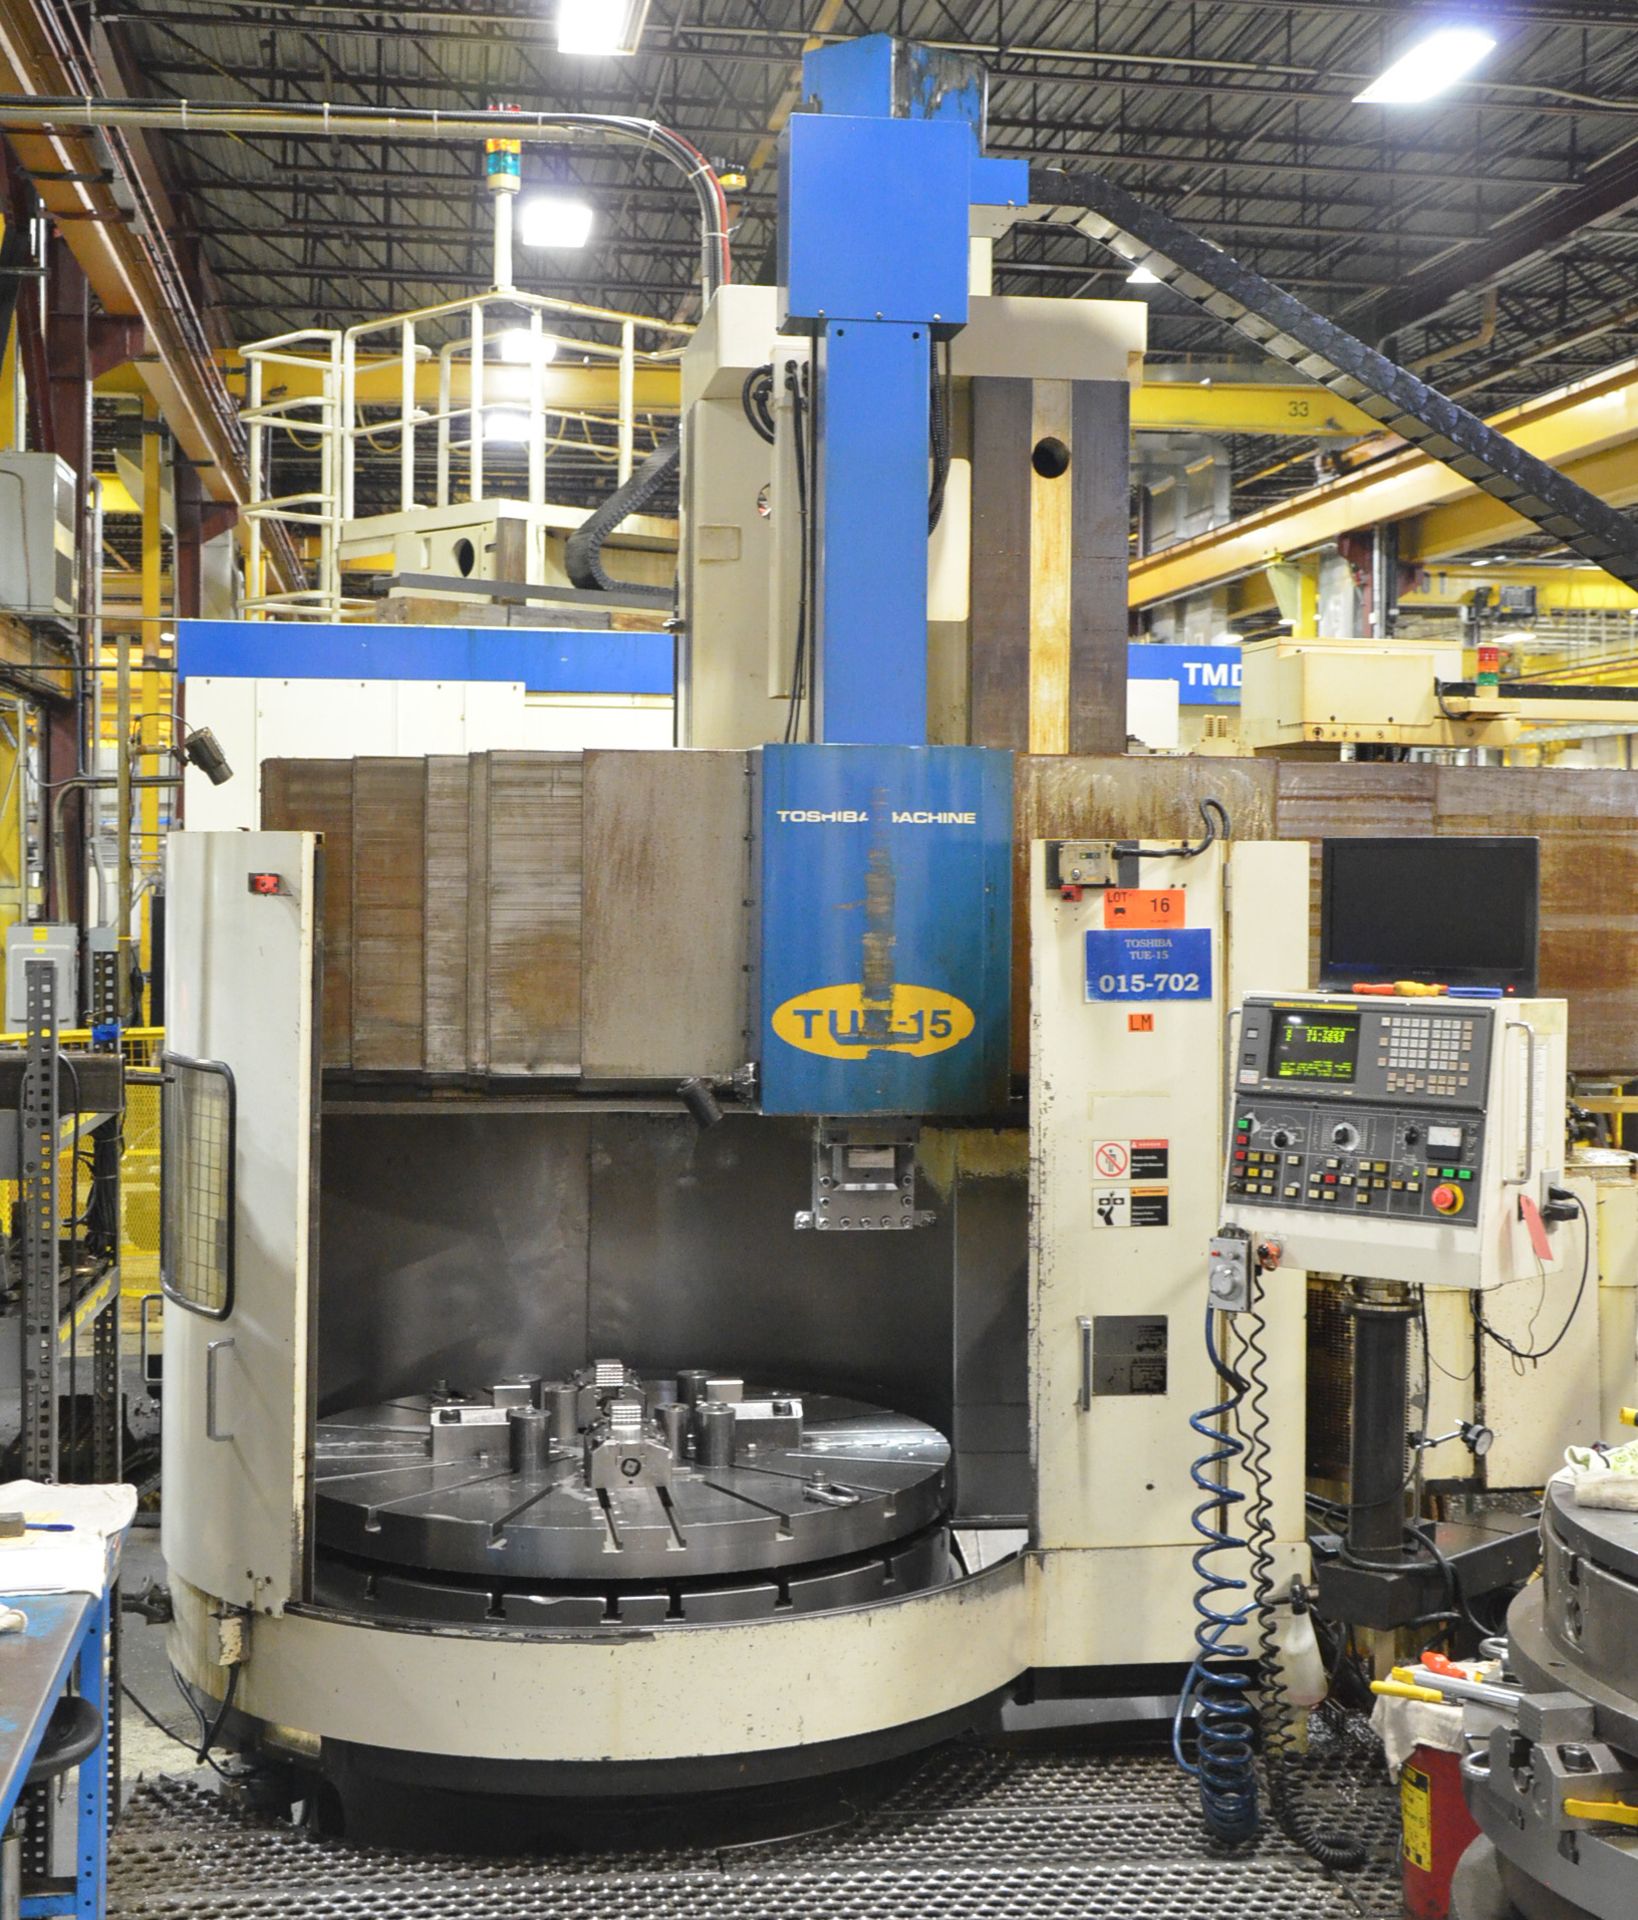 TOSHIBA SHIBAURA (08-2006) TUE-15 CNC VERTICAL BORING AND LIVE MILLING CENTER WITH FANUC SERIES 18-T - Image 2 of 19